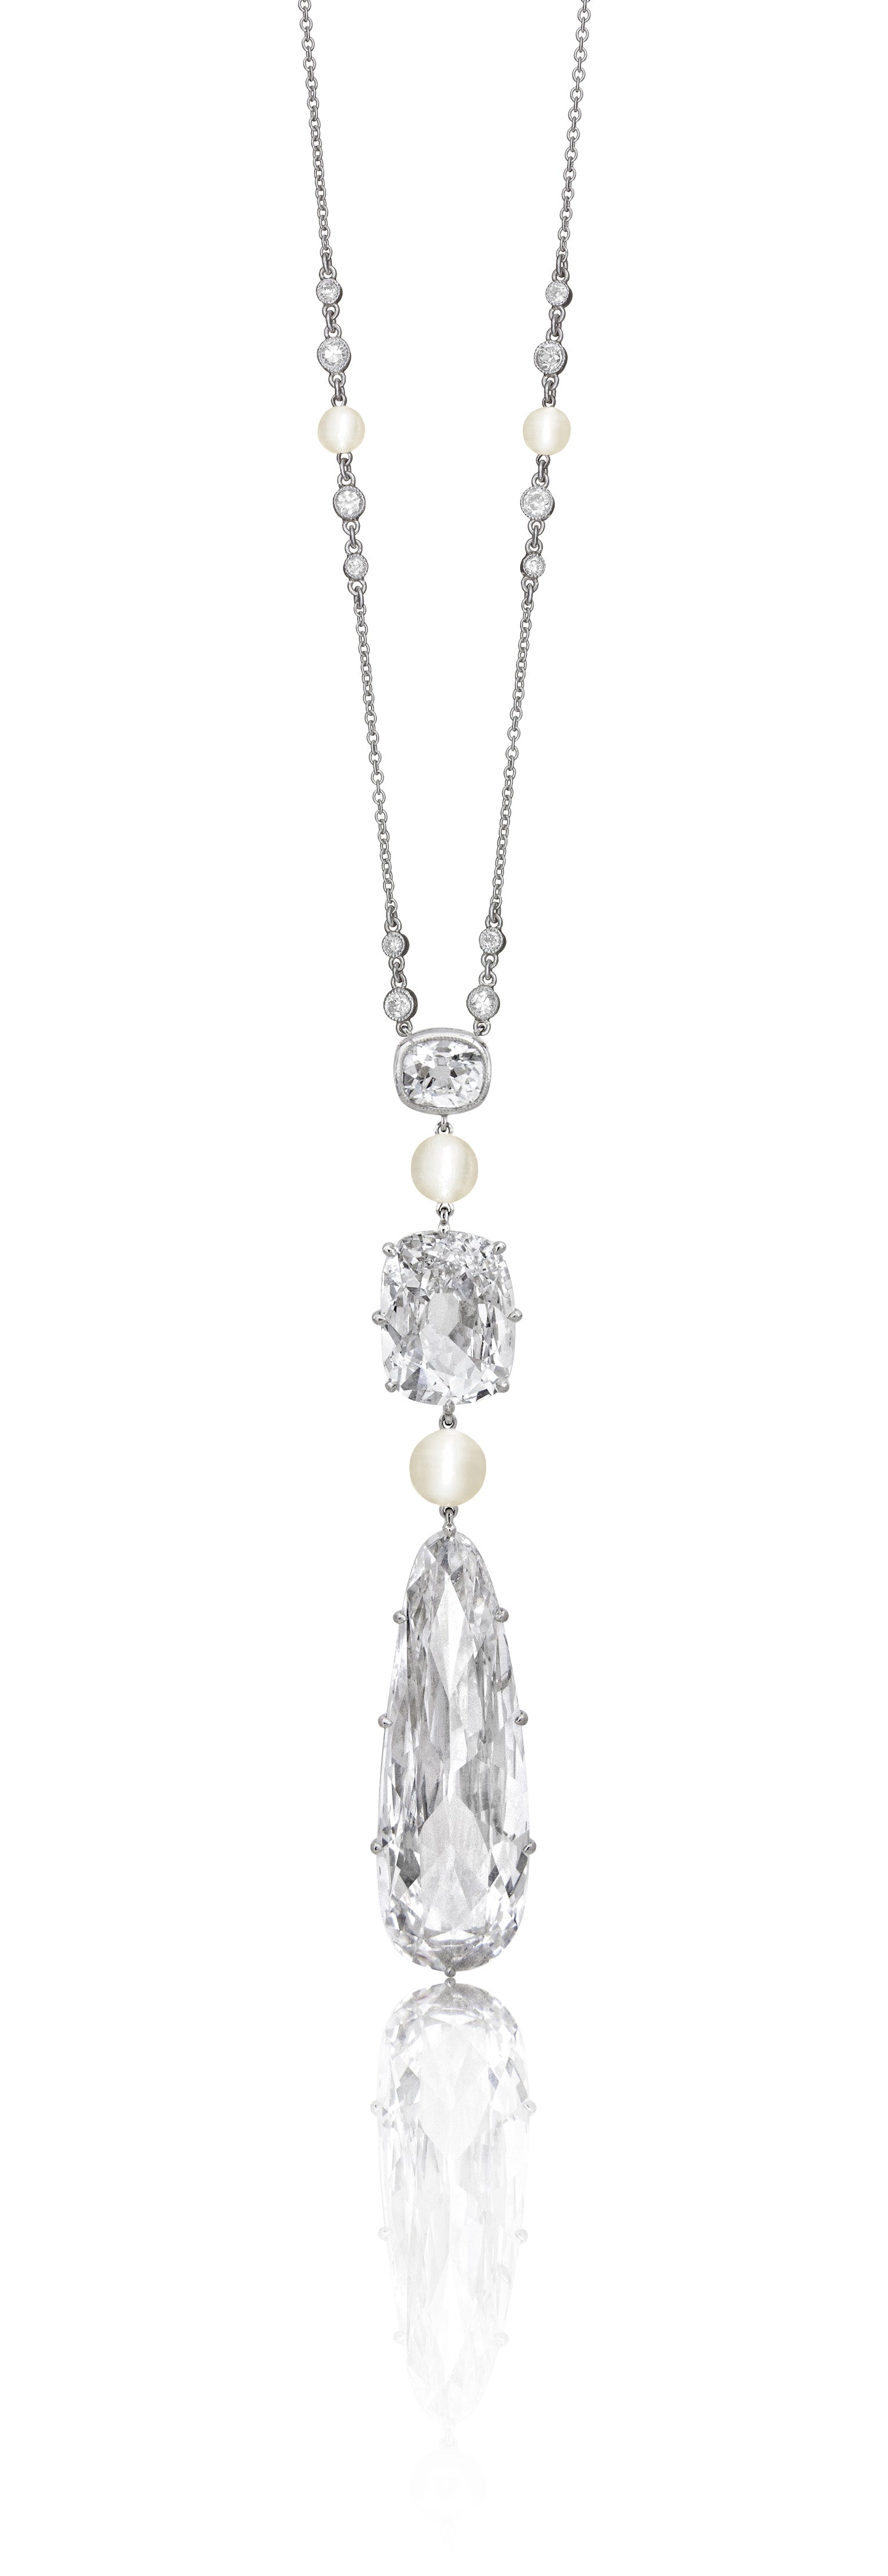 GOLCONDA  DIAMOND  AND  PEARL  NECKLACE BY  SIEGELSON,  NEW  YORK